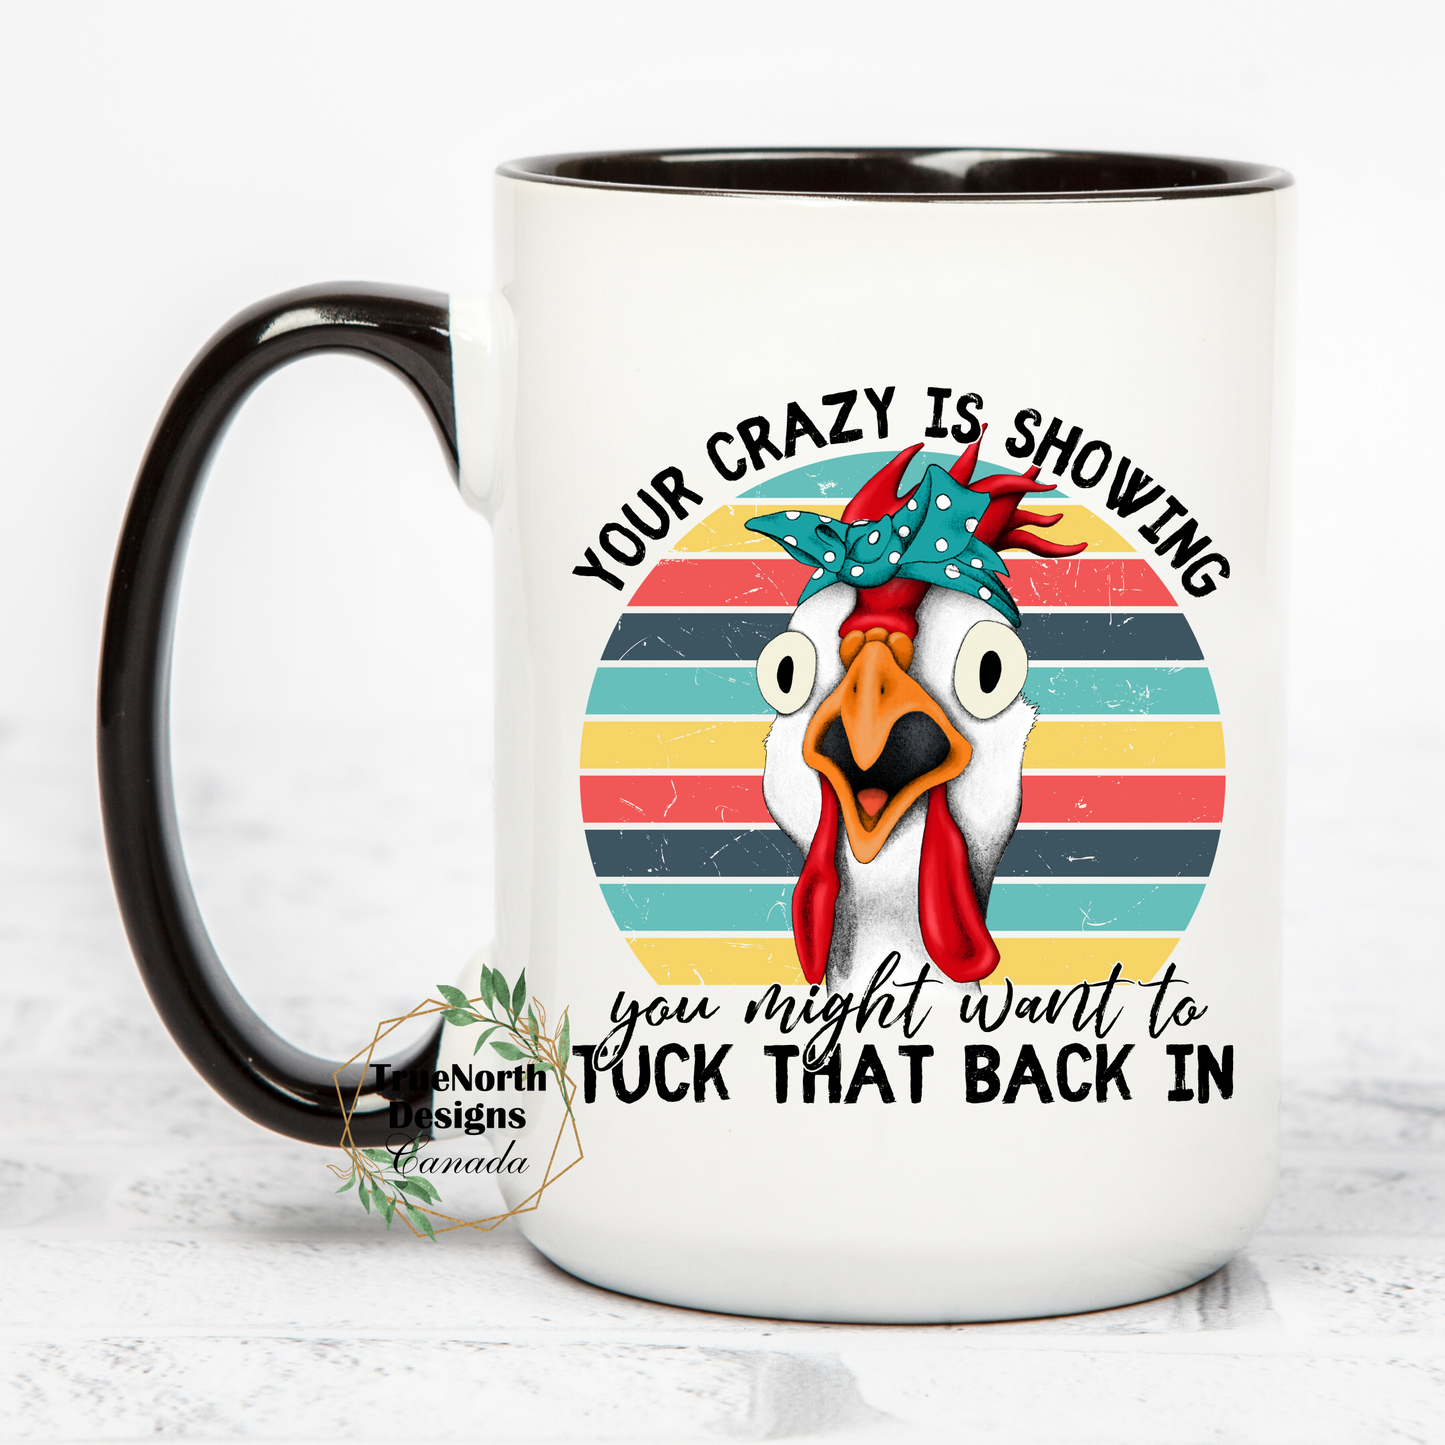 Your Crazy Is Showing Chicken Mug